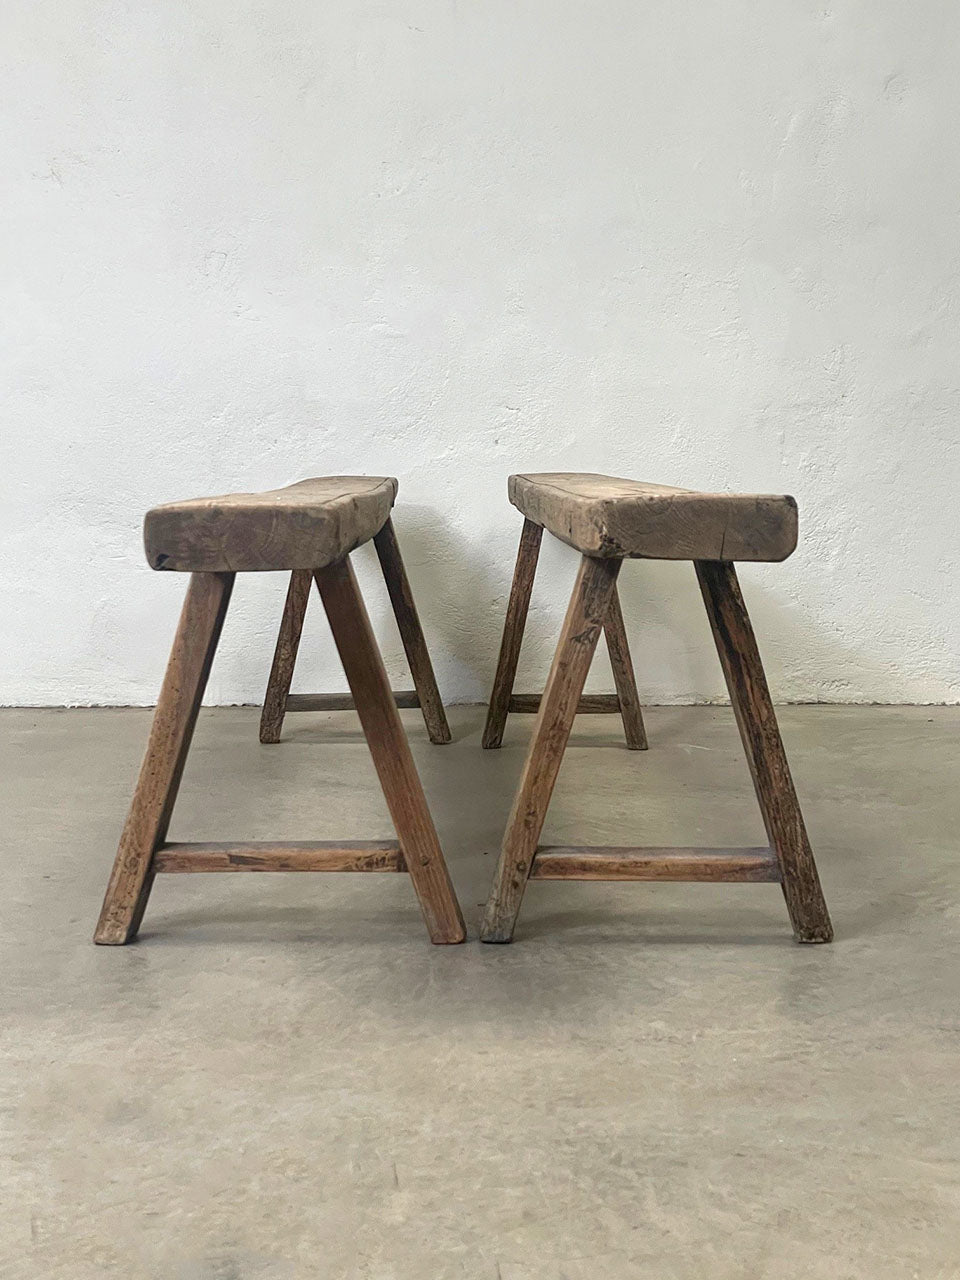 Near pair of oak trestle benches (Reserved)